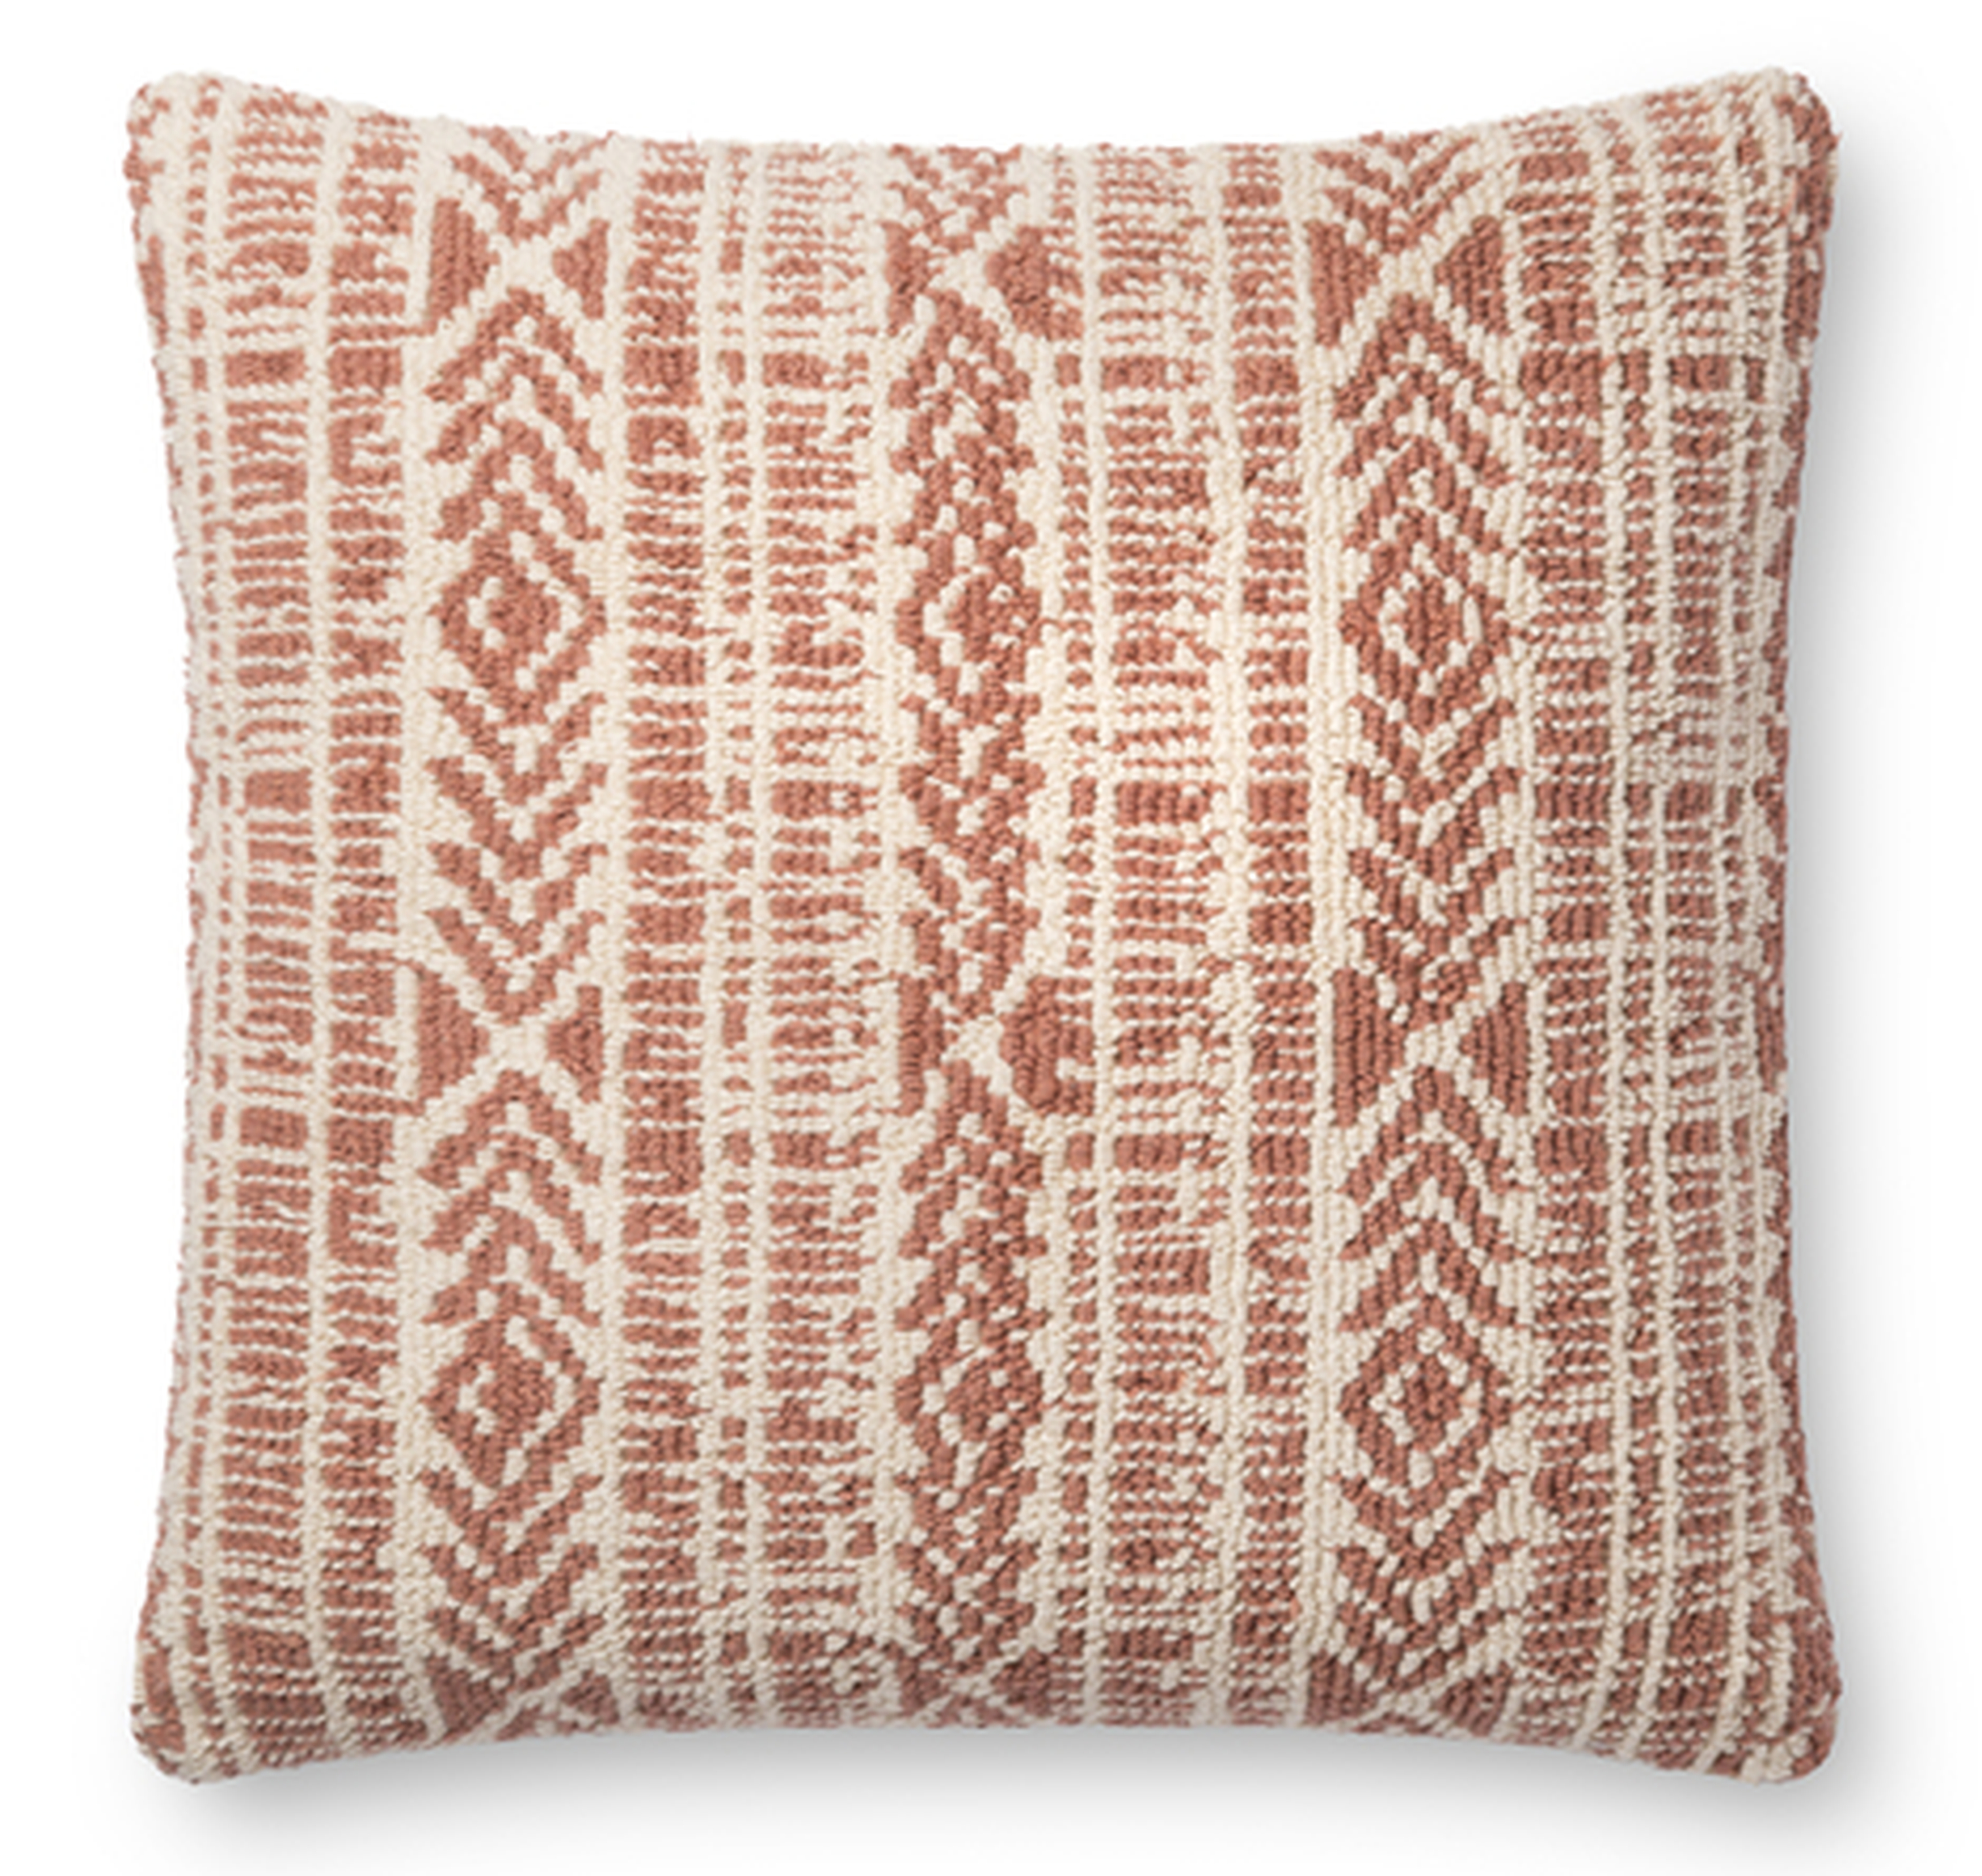 IONE PILLOW, RED AND IVORY - Lulu and Georgia